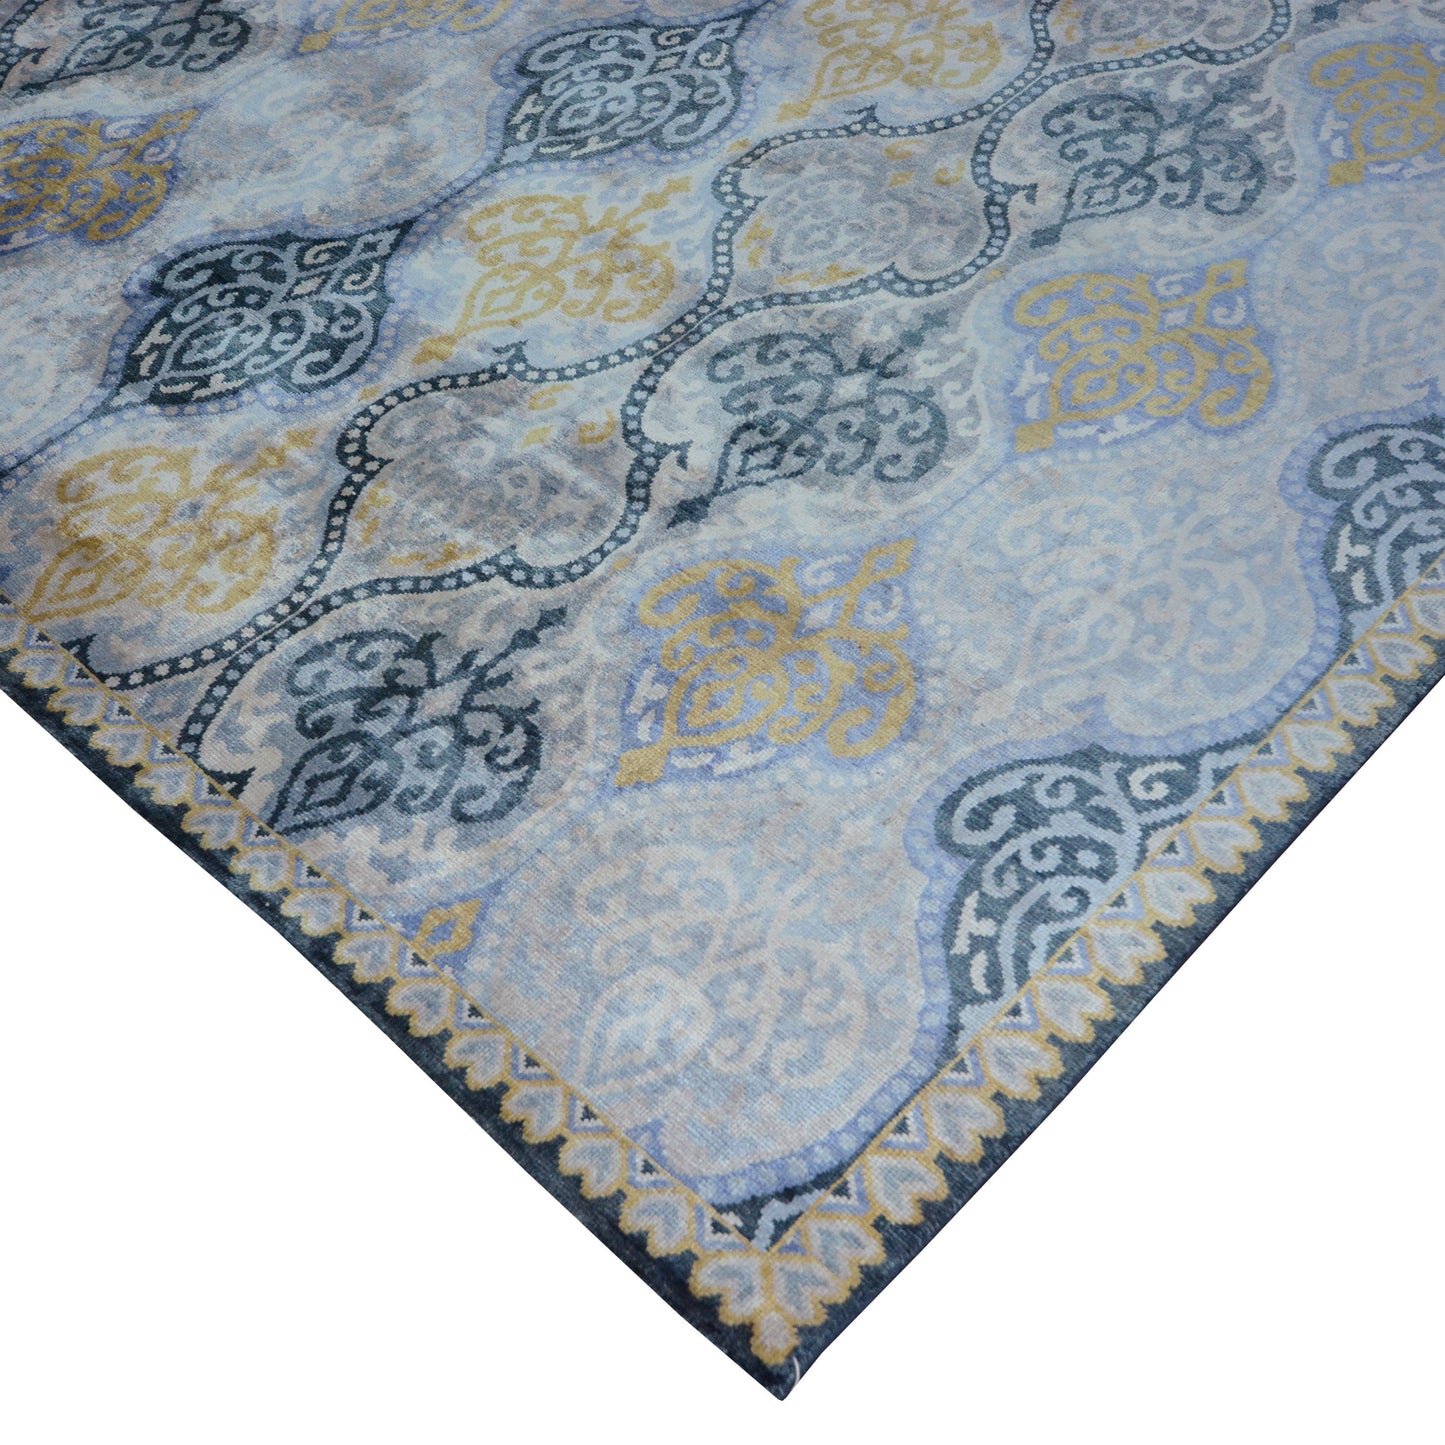 Get trendy with Wazir Silver, Gold and Light Blue Transitional Damask Handknotted Area Rug - Transitional Rugs available at Jaipur Oriental Rugs. Grab yours for $5795.00 today!